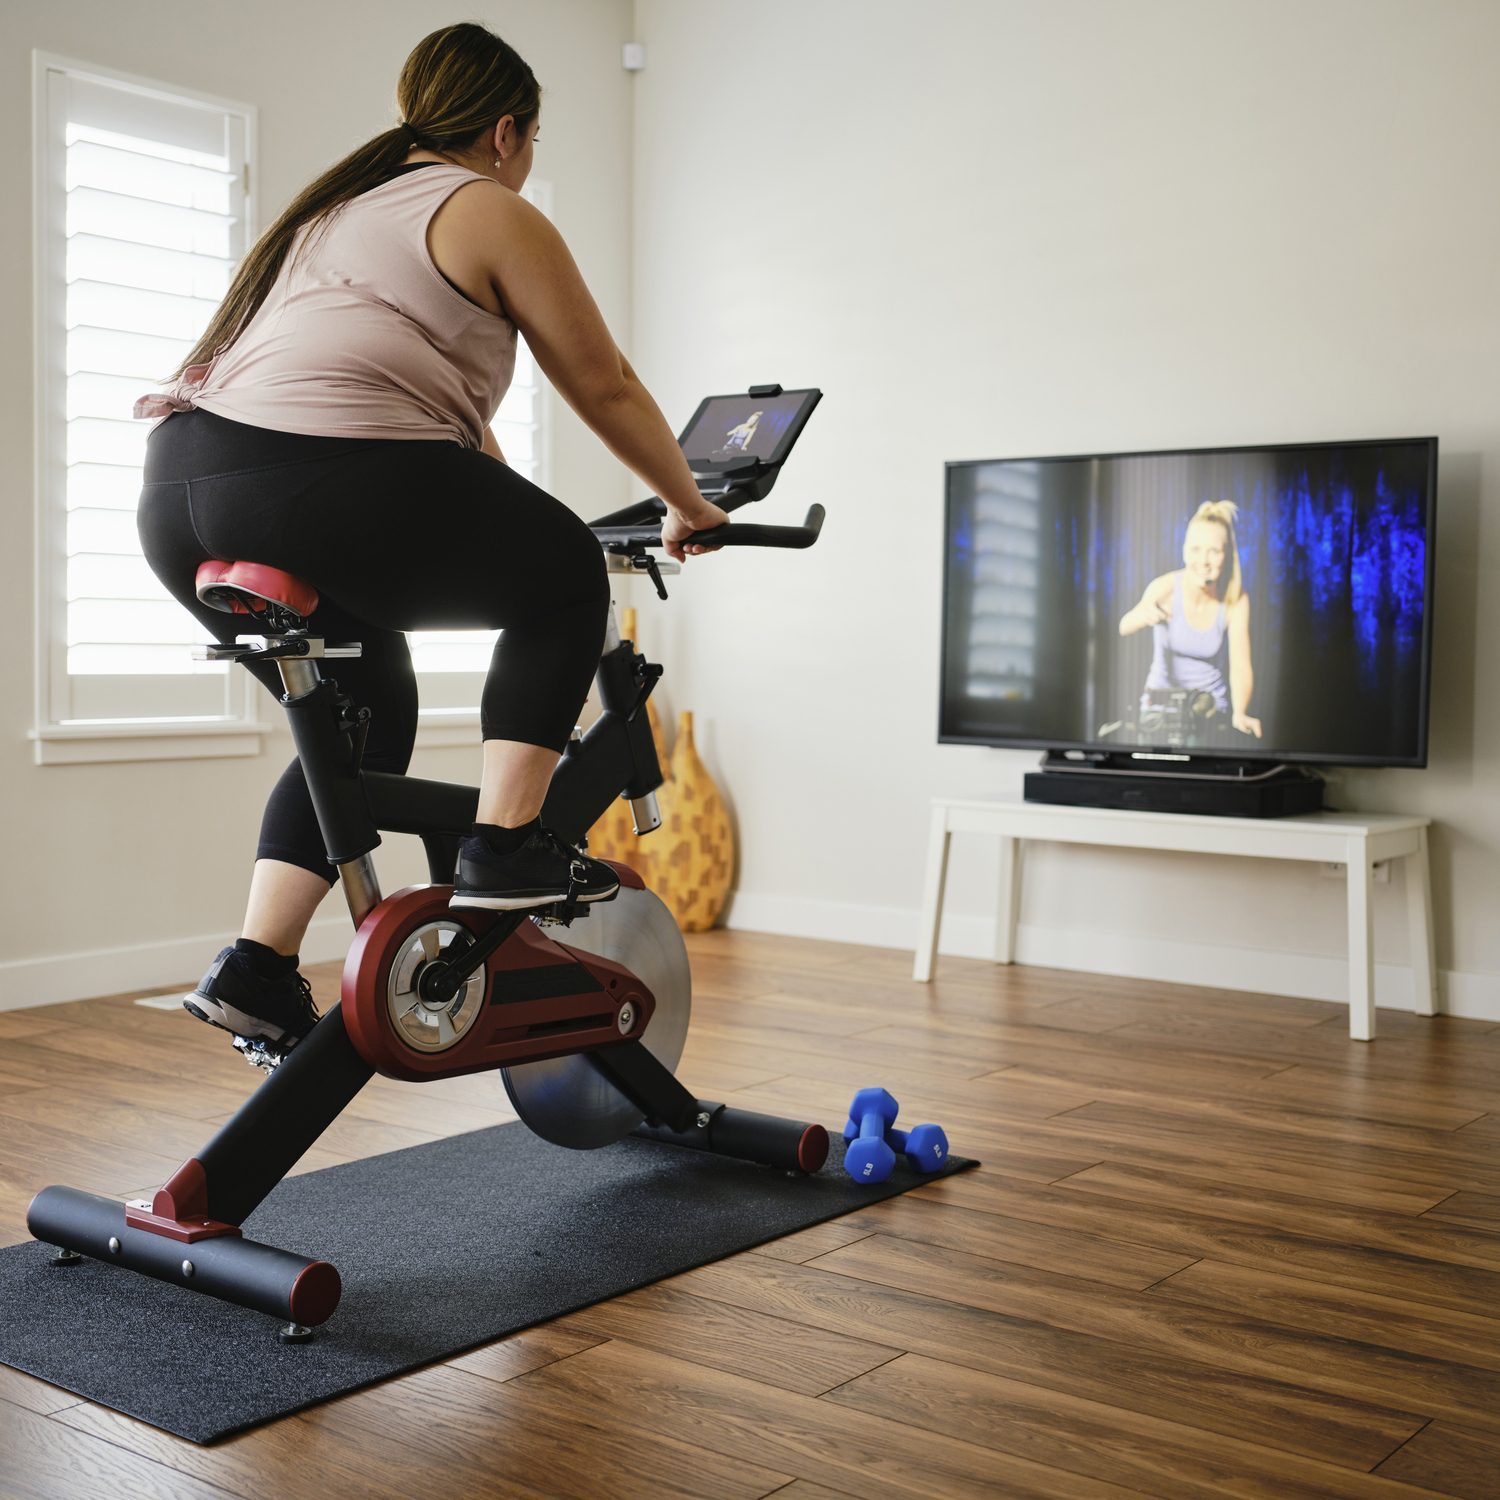 Why You Should Buy Cycling Shoes if You Use an Exercise Bike at Home